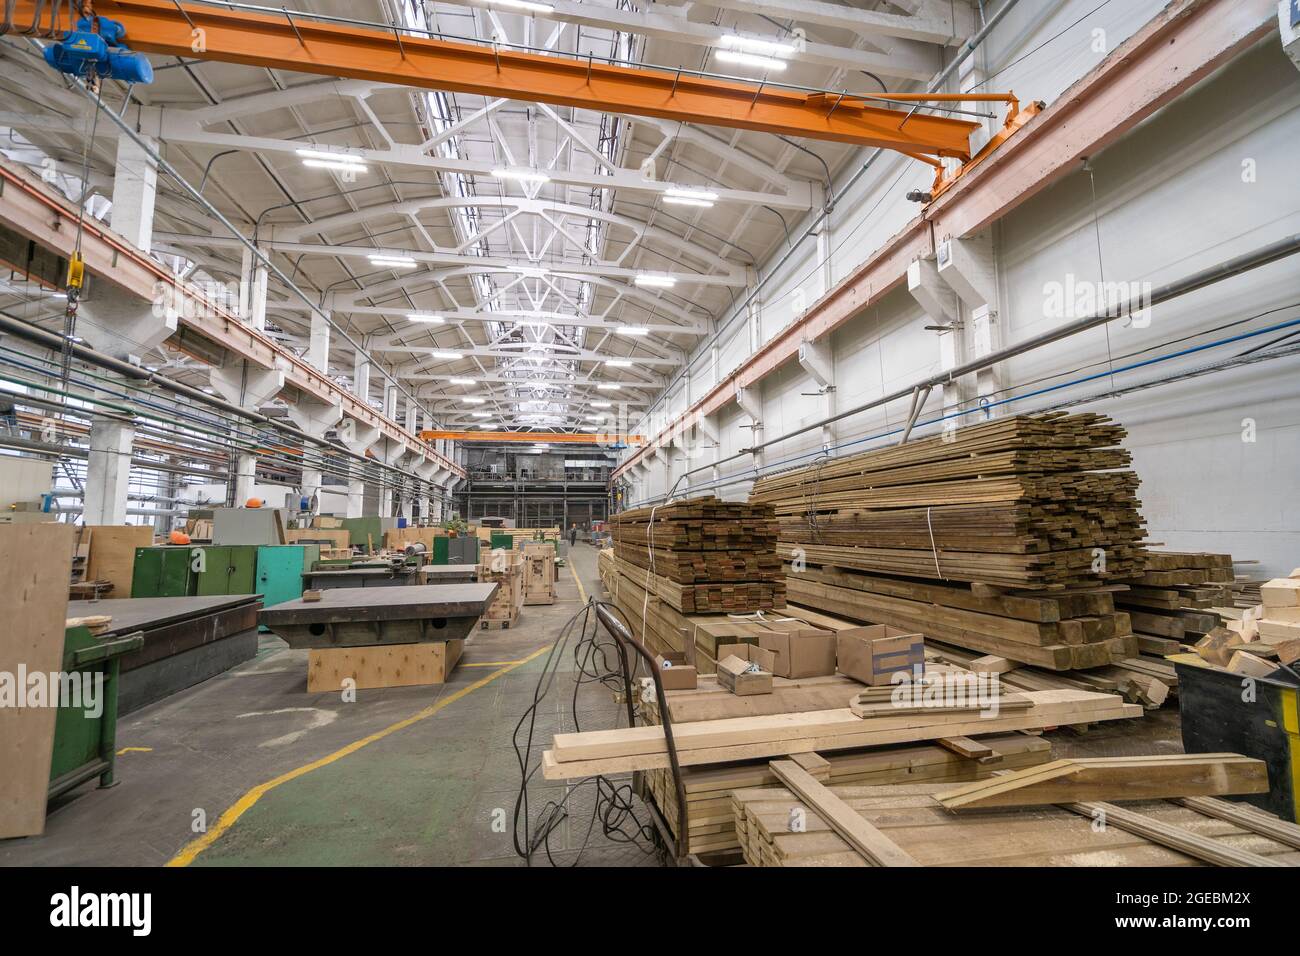 Inside huge factory workshop interior with stacks of wood for making molds. Woodwork manufacture production industry. Stock Photo